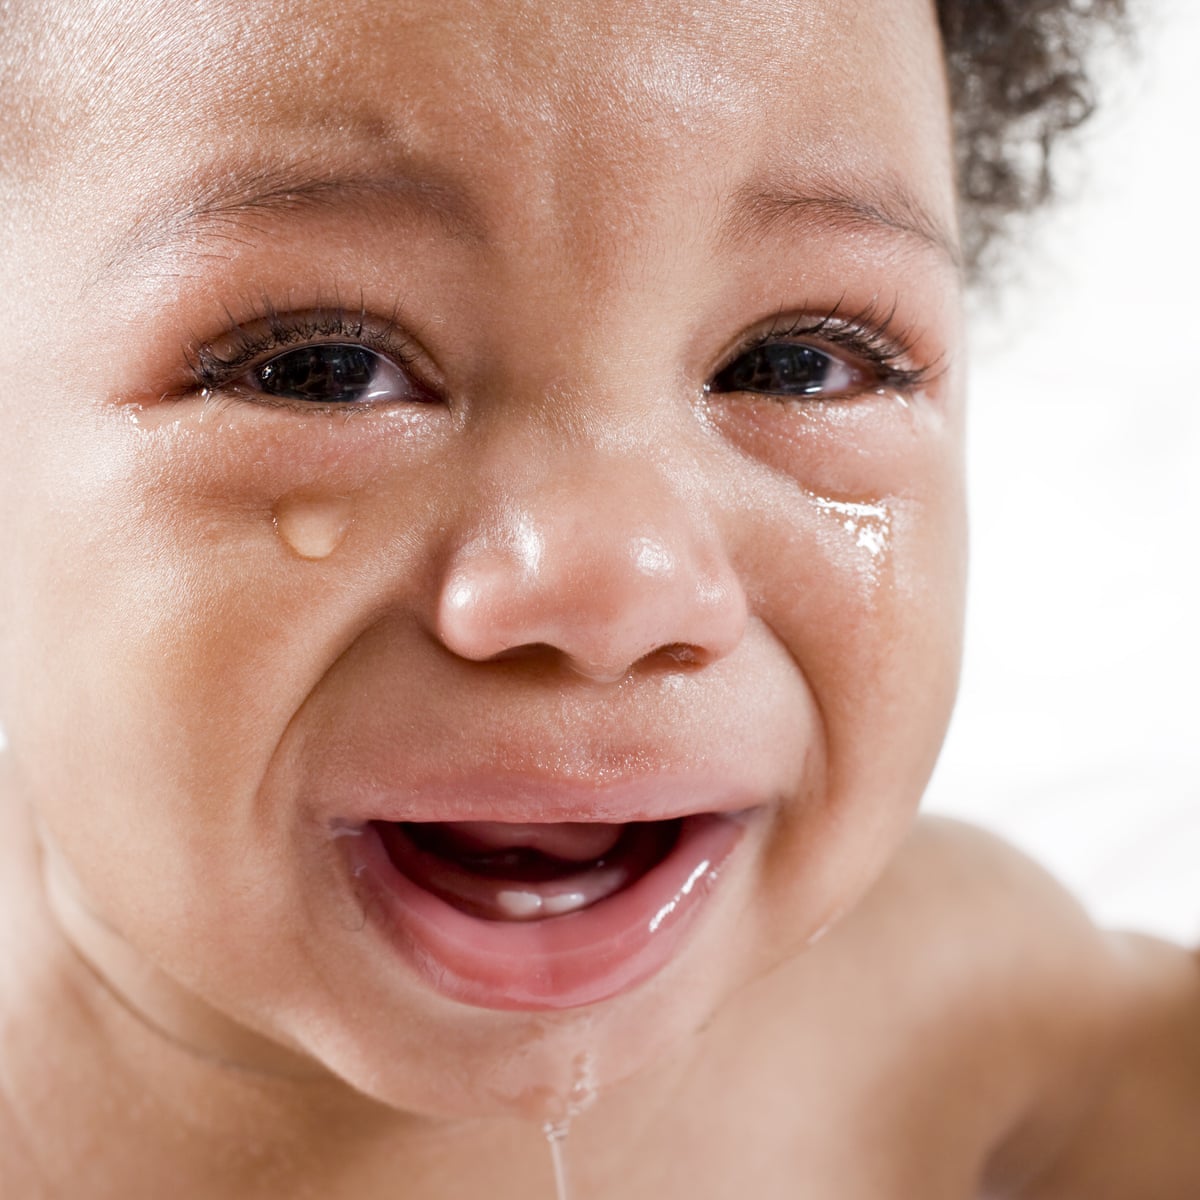 He baby cries. Baby crying. A Baby's Cry. Cry Baby Cry Baby плачет. Unhappy Baby crying.